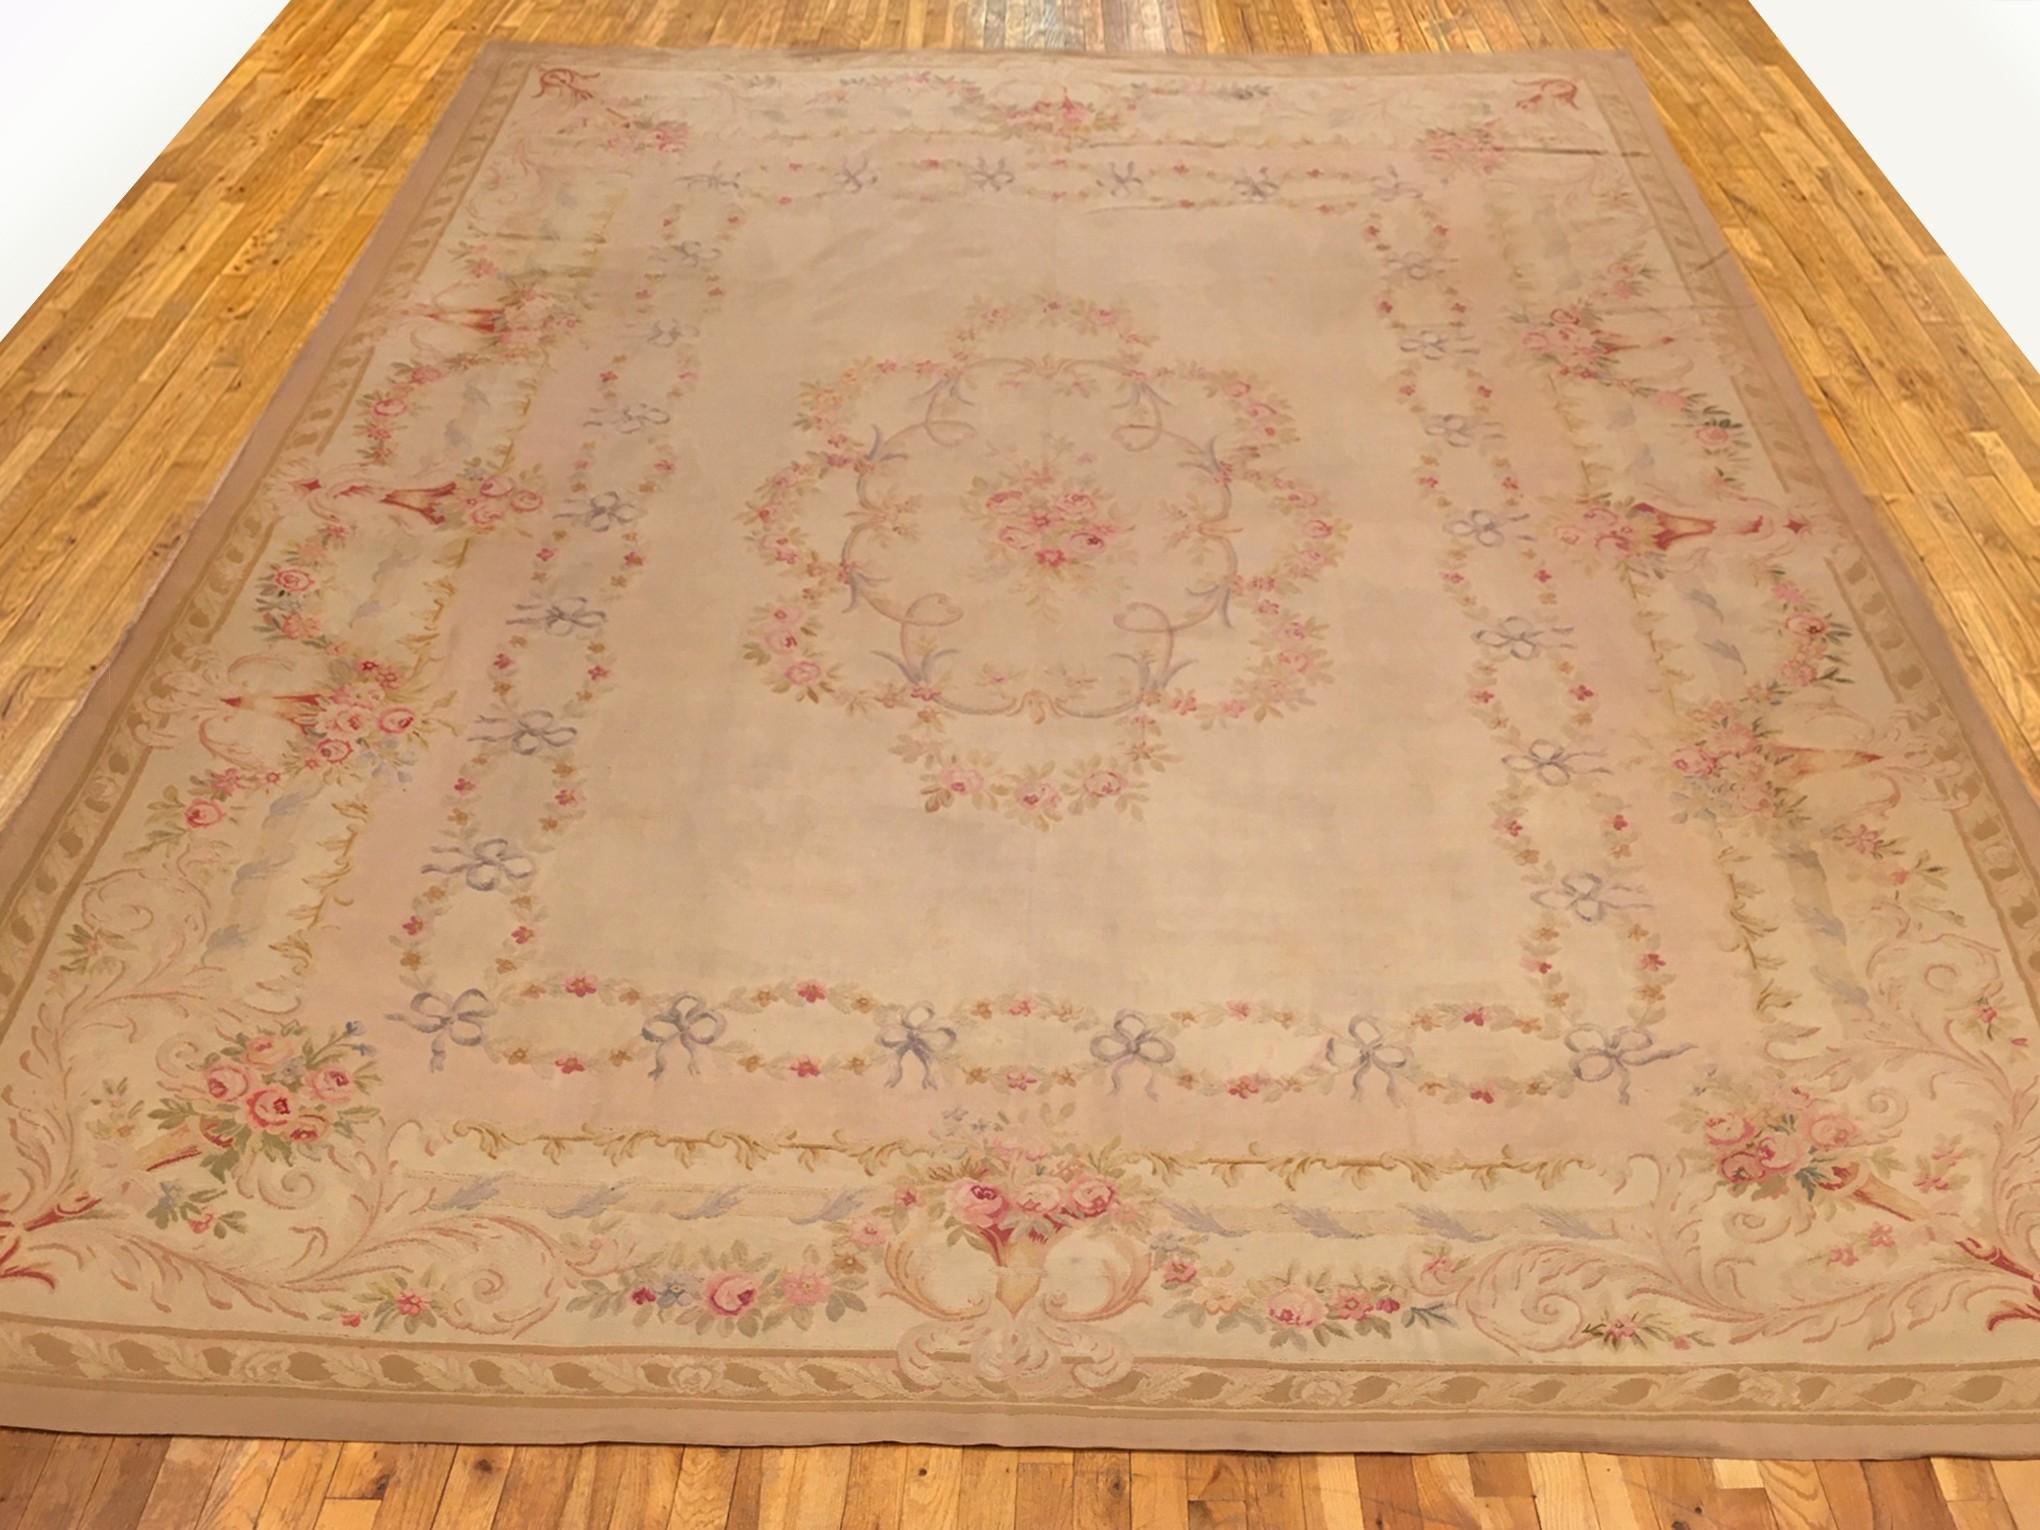 Antique French Aubusson Rug, Room size, circa 1890

A one-of-a-kind antique French Aubusson Carpet, hand-knotted with soft wool pile. This lovely hand-knotted rug features a central medallion design on the ivory primary field, with a delicate ivory